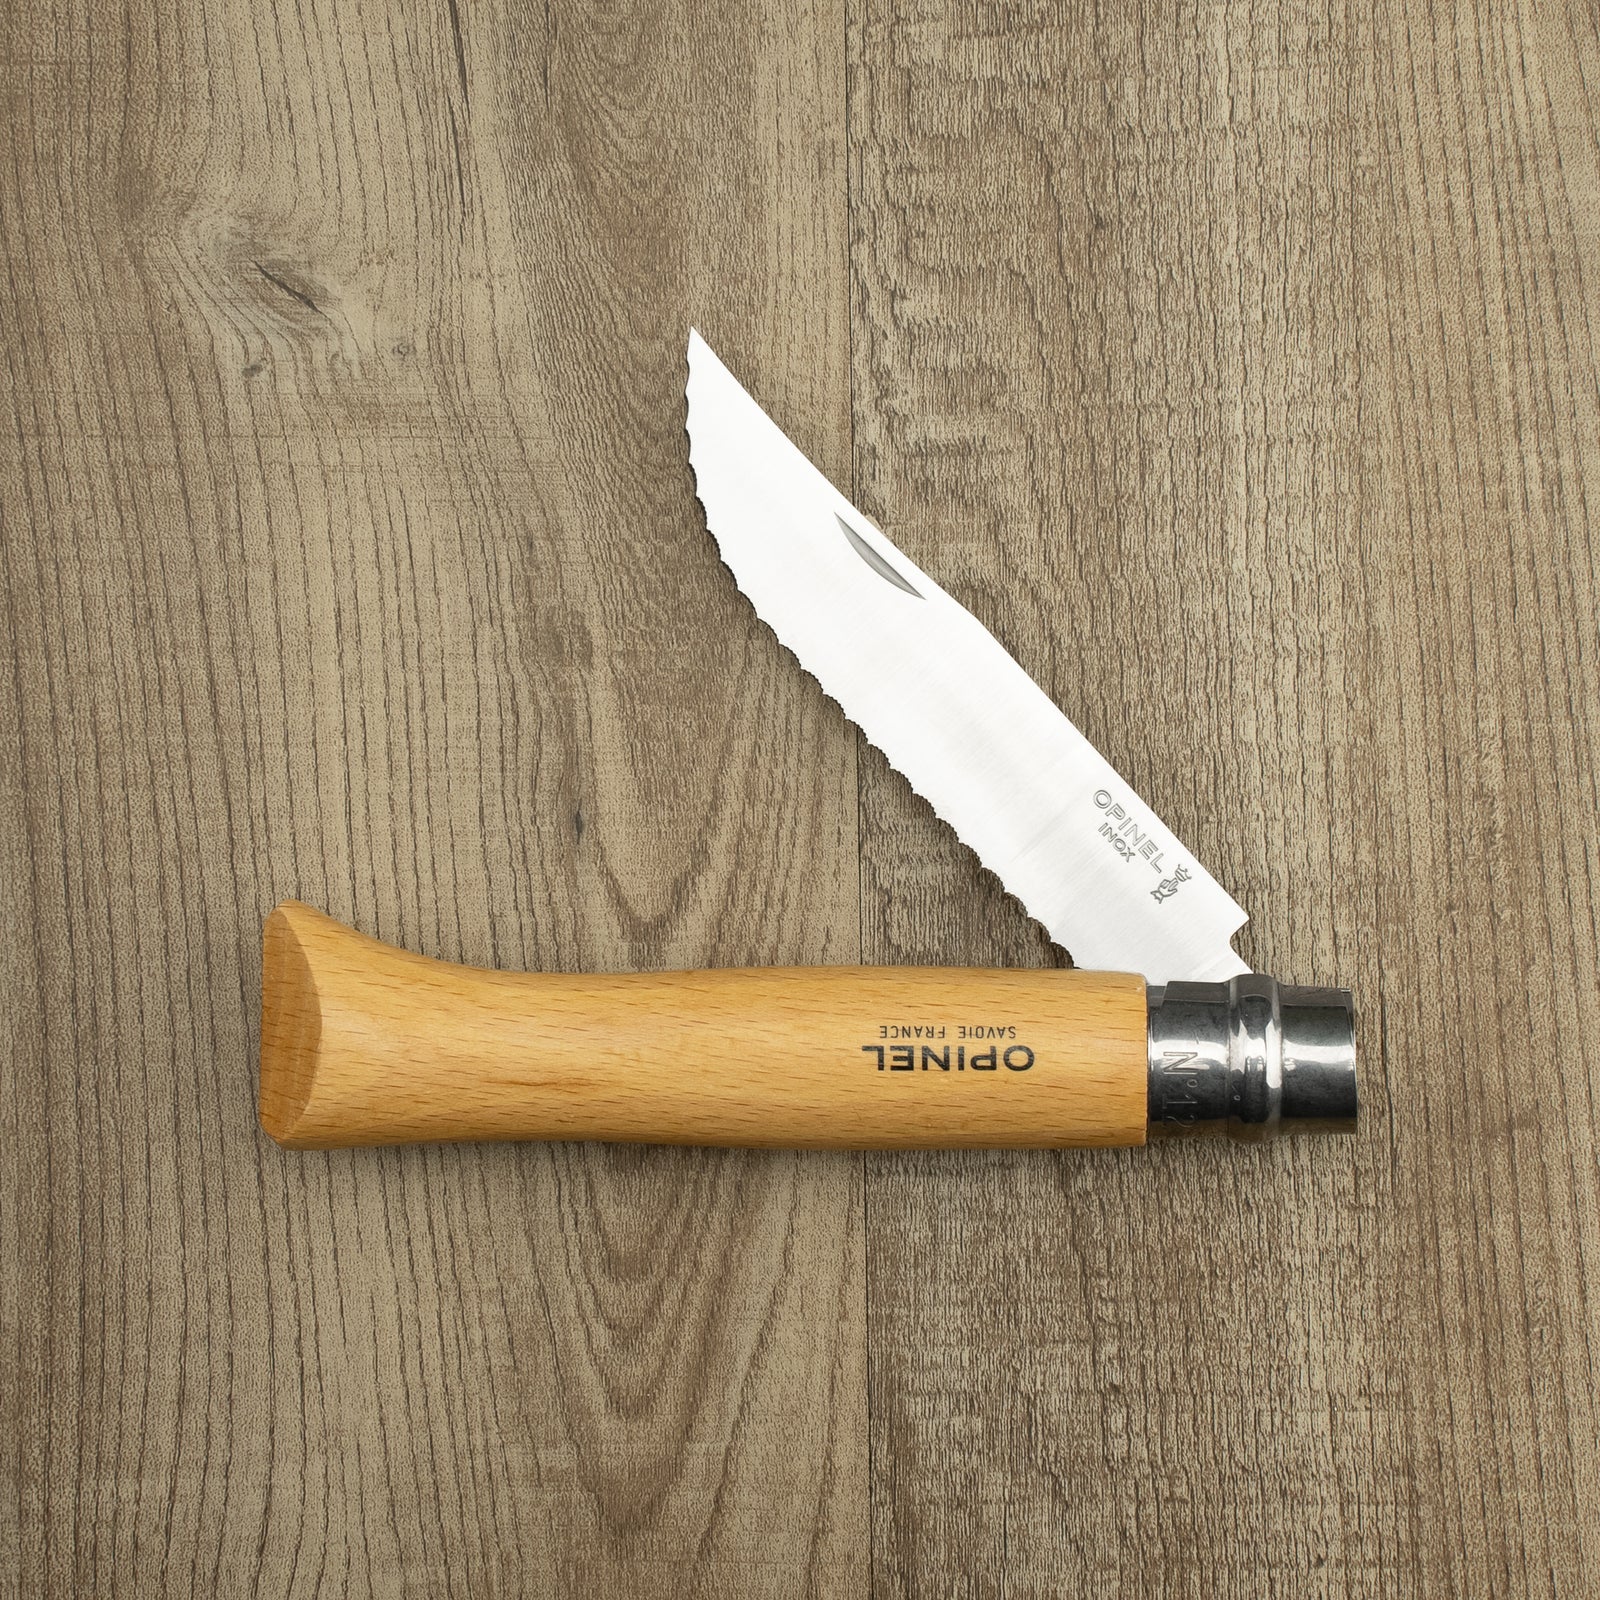 Opinel Inox No.12 Serrated Camp Cooking Knife